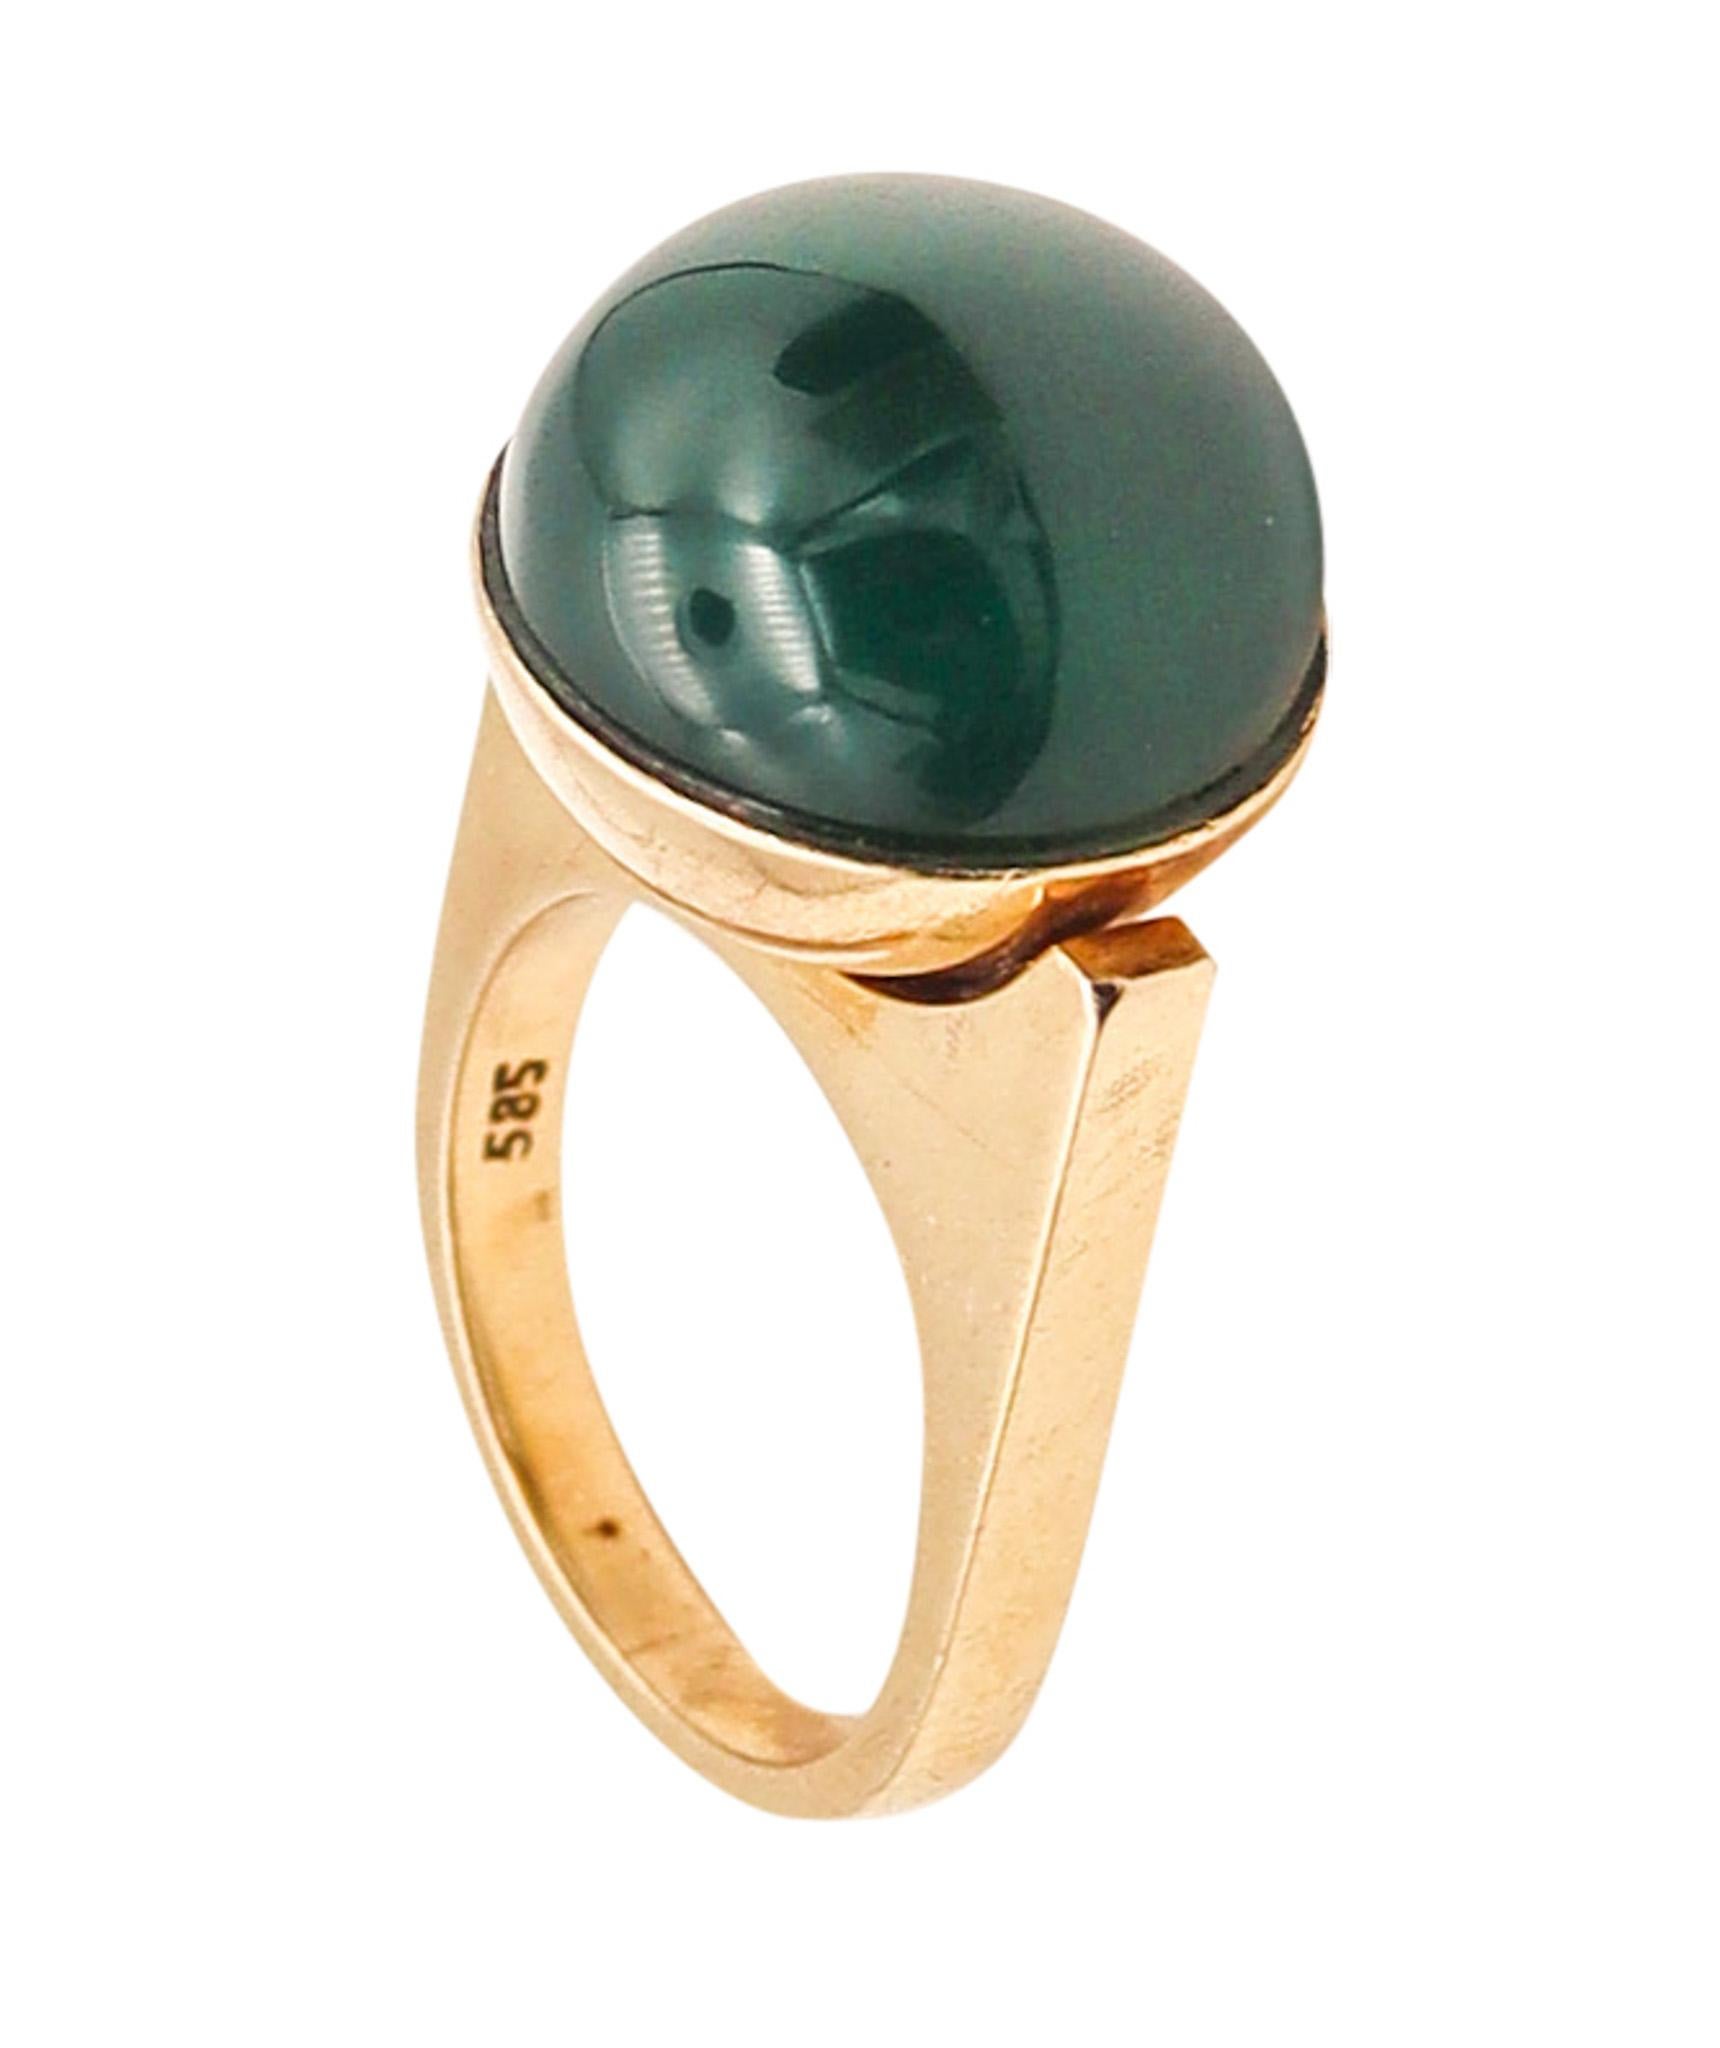 Knud V. Andersen 1970 Geometric Sculptural Ring In 14Kt Gold With Chrysoprase For Sale